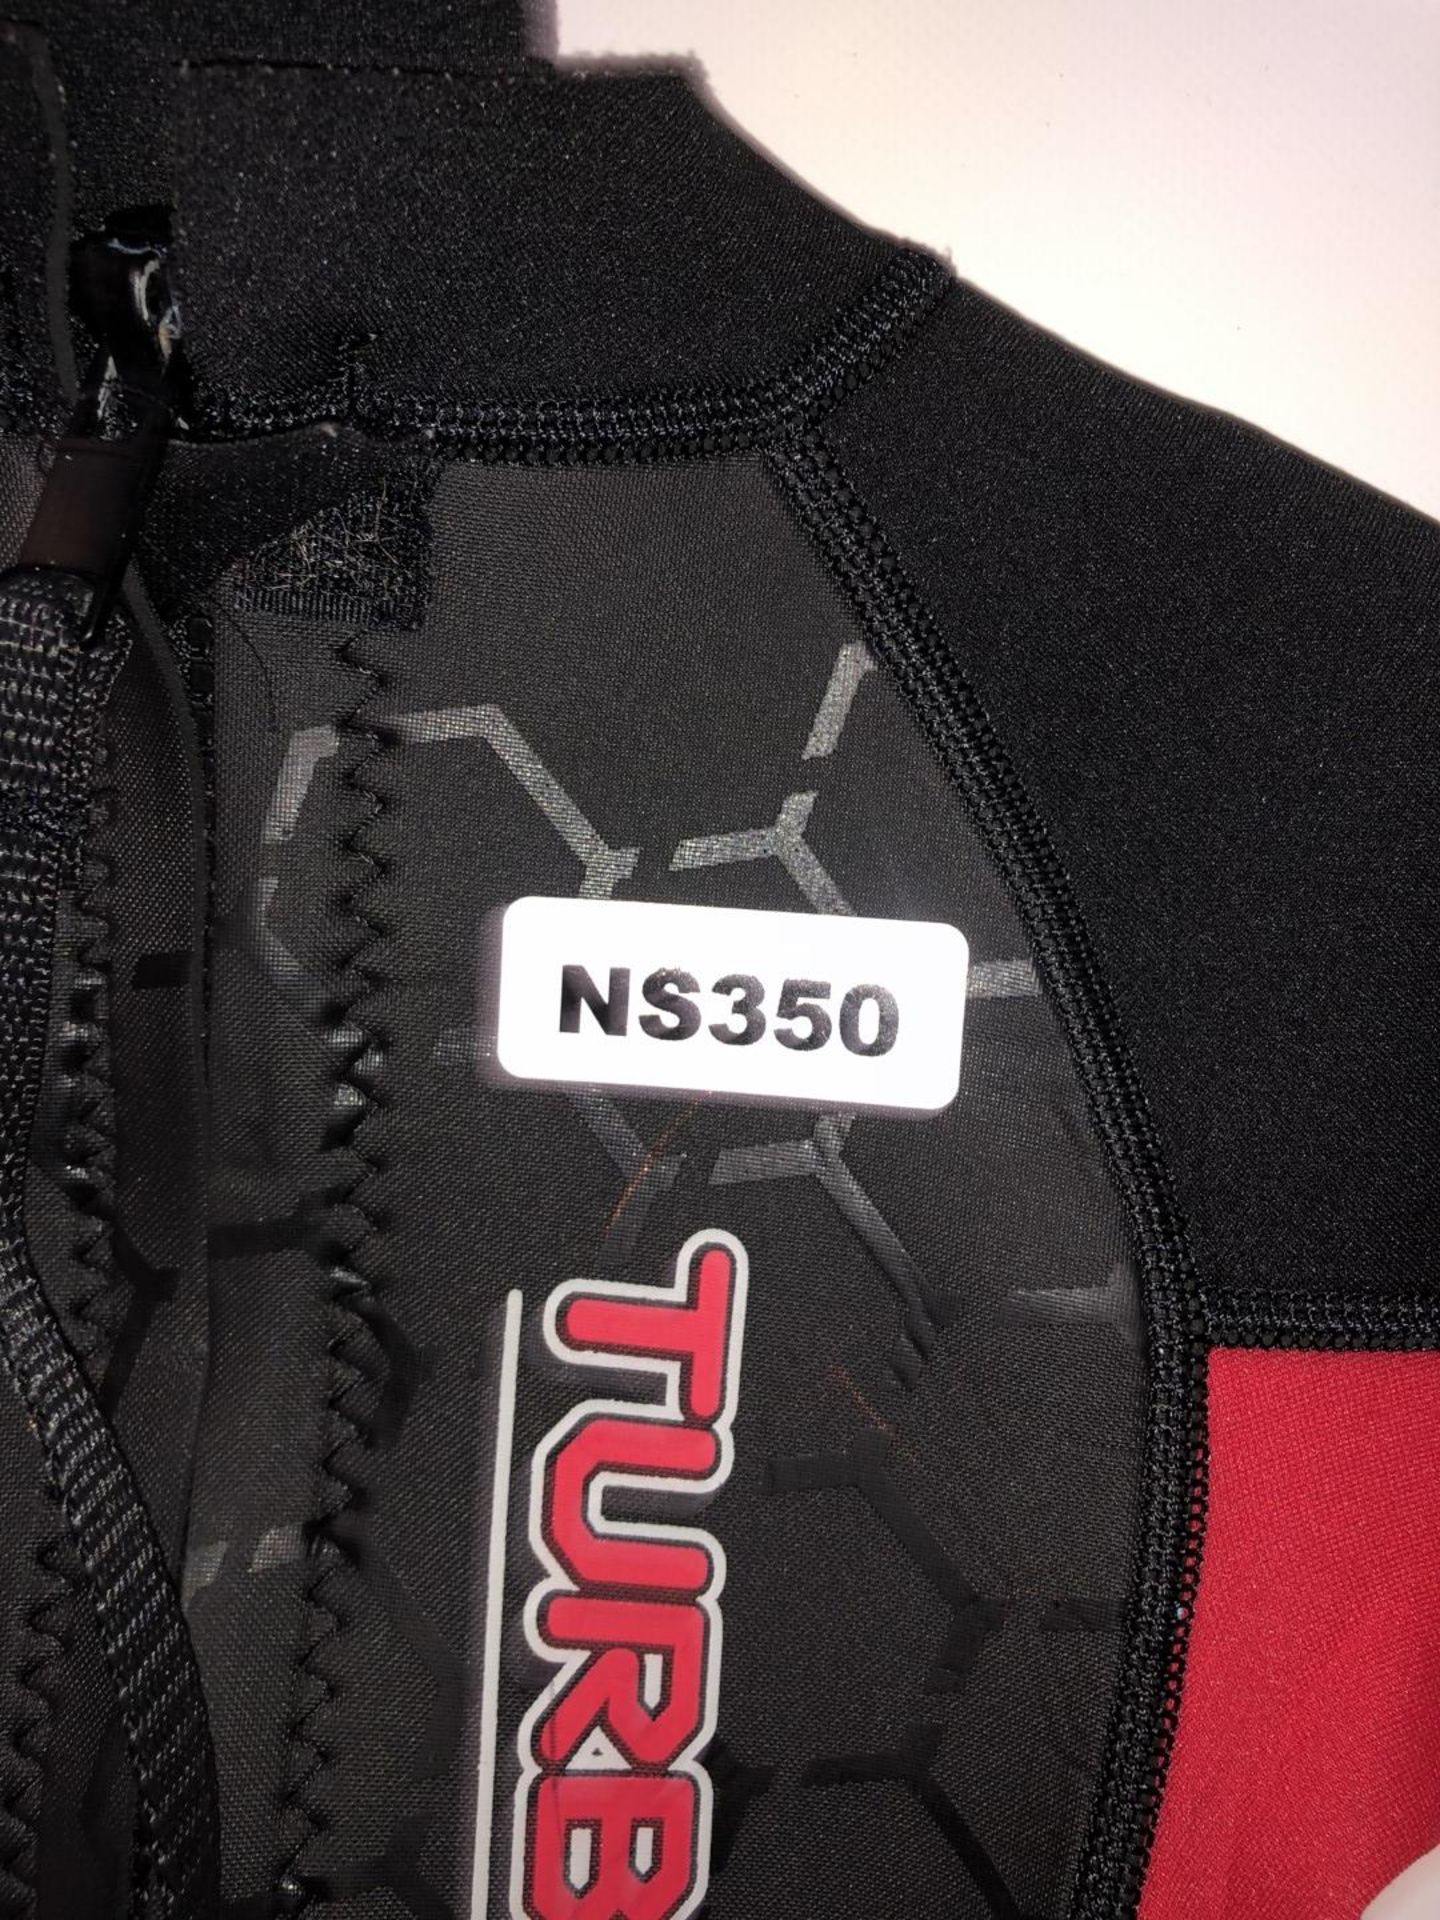 1 x New Junior Red and Black Turbo Wetsuit Factory - Ref: NS350 - CL349 - Altrincham WA14 - Image 4 of 5